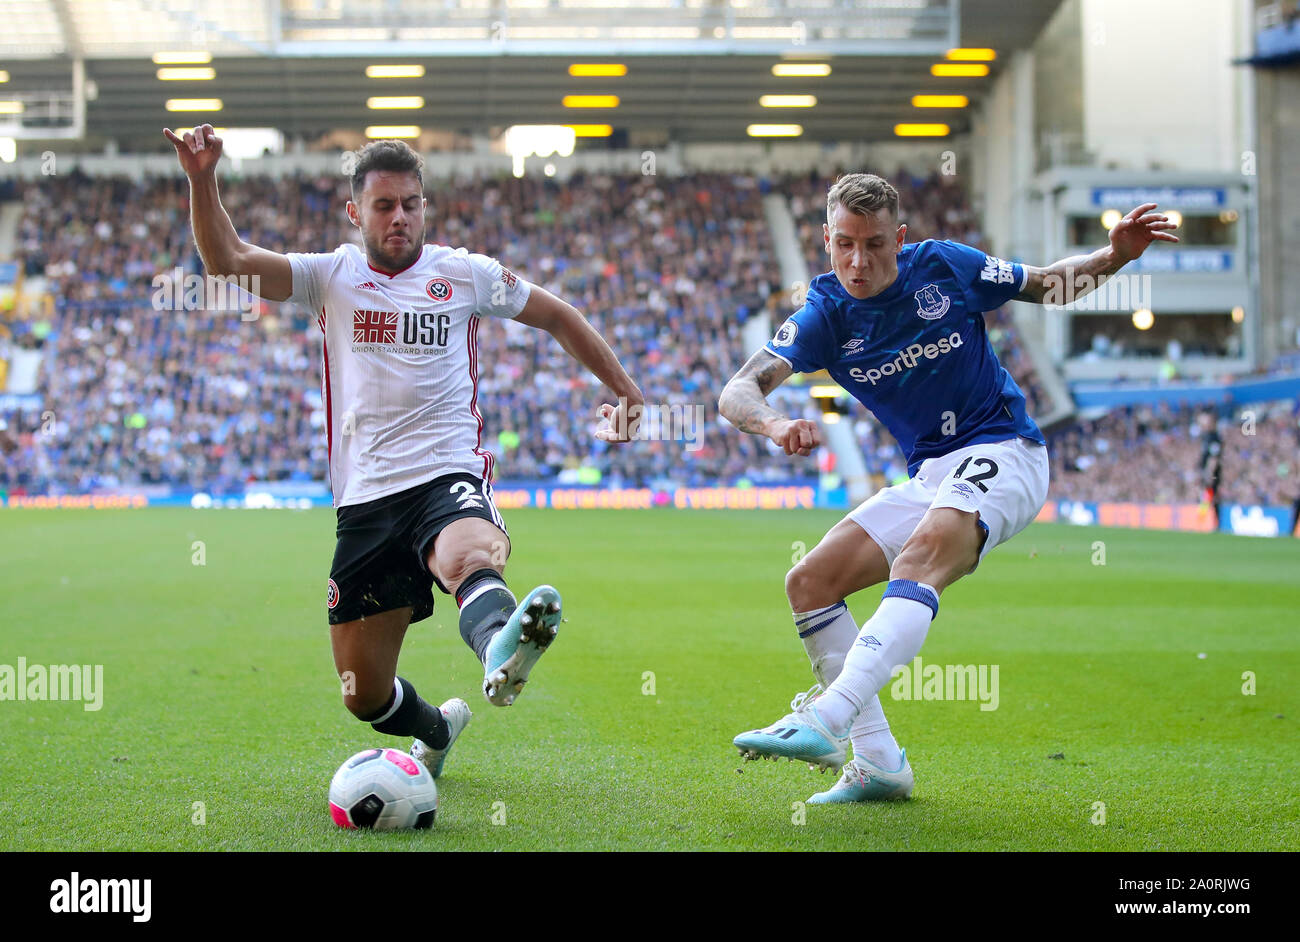 Sheffield United's George Baldock (left) and Everton's Lucas Digne battle for the ball during the Premier League match at Goodison Park, Liverpool. Stock Photo